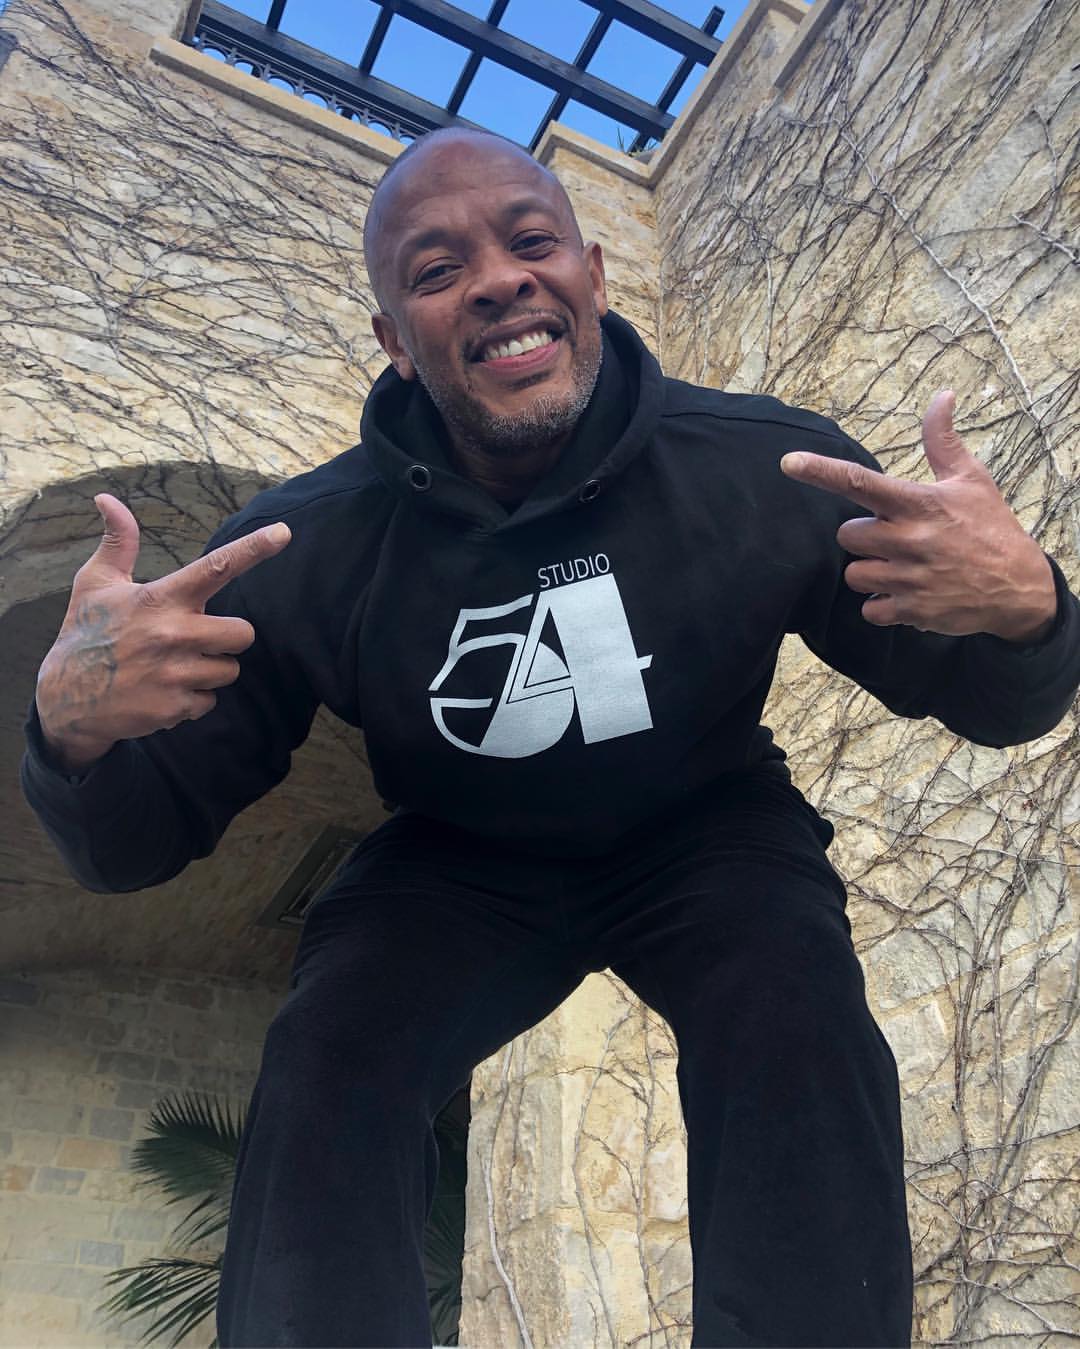 dr-dre-hospitalized-brain-aneurysm-wande-coal-mental-health-depressed-premiere-league-covid-19-latest-news-global-world-stories-wednesday-january-2020-style-rave